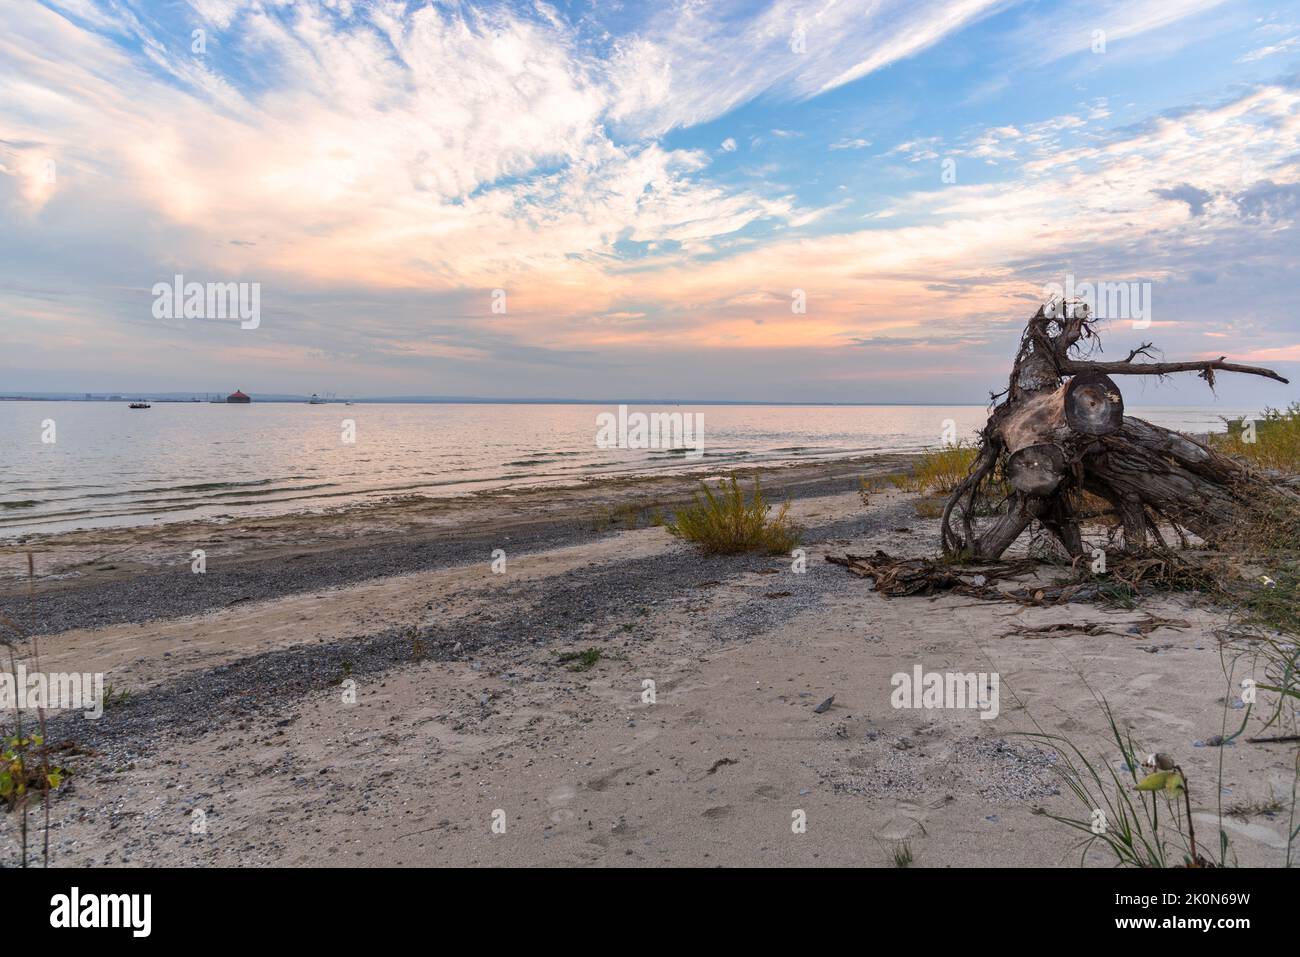 Beautful sunset over a deserted beach with driftwood on a lake in autumn. Lake Eire, Canada. Stock Photo